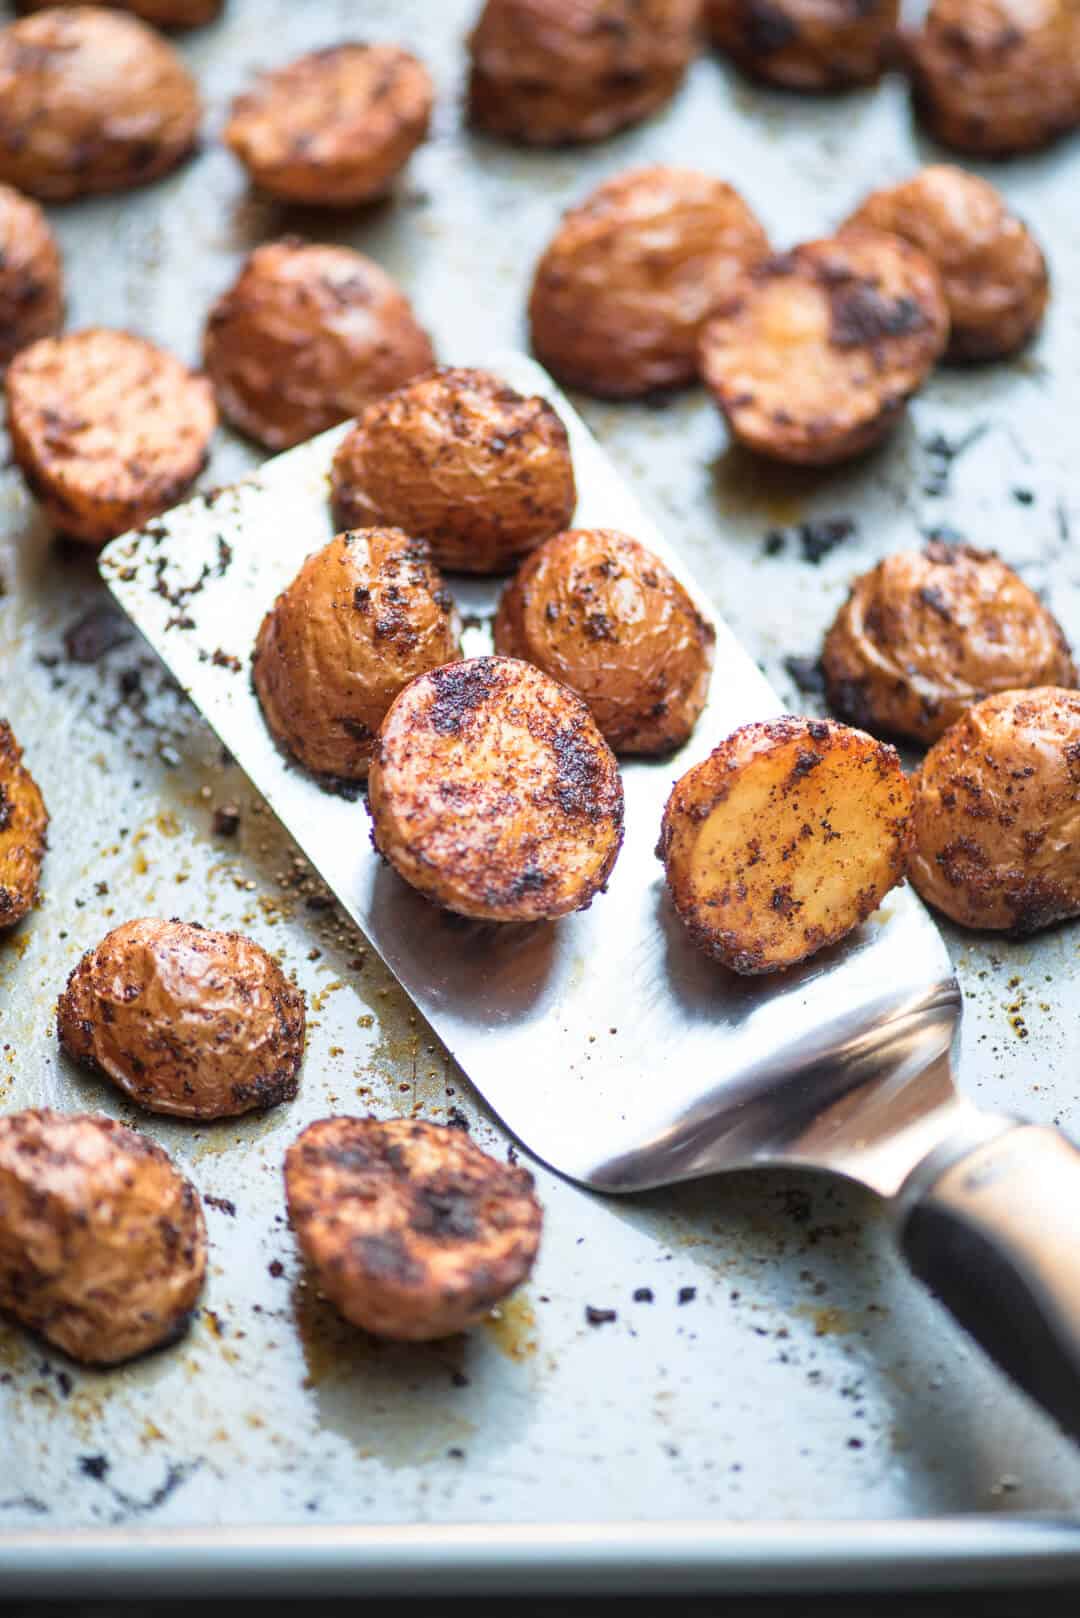 A spatula scoops up some Oven Roasted BBQ Potatoes from a baking sheet.